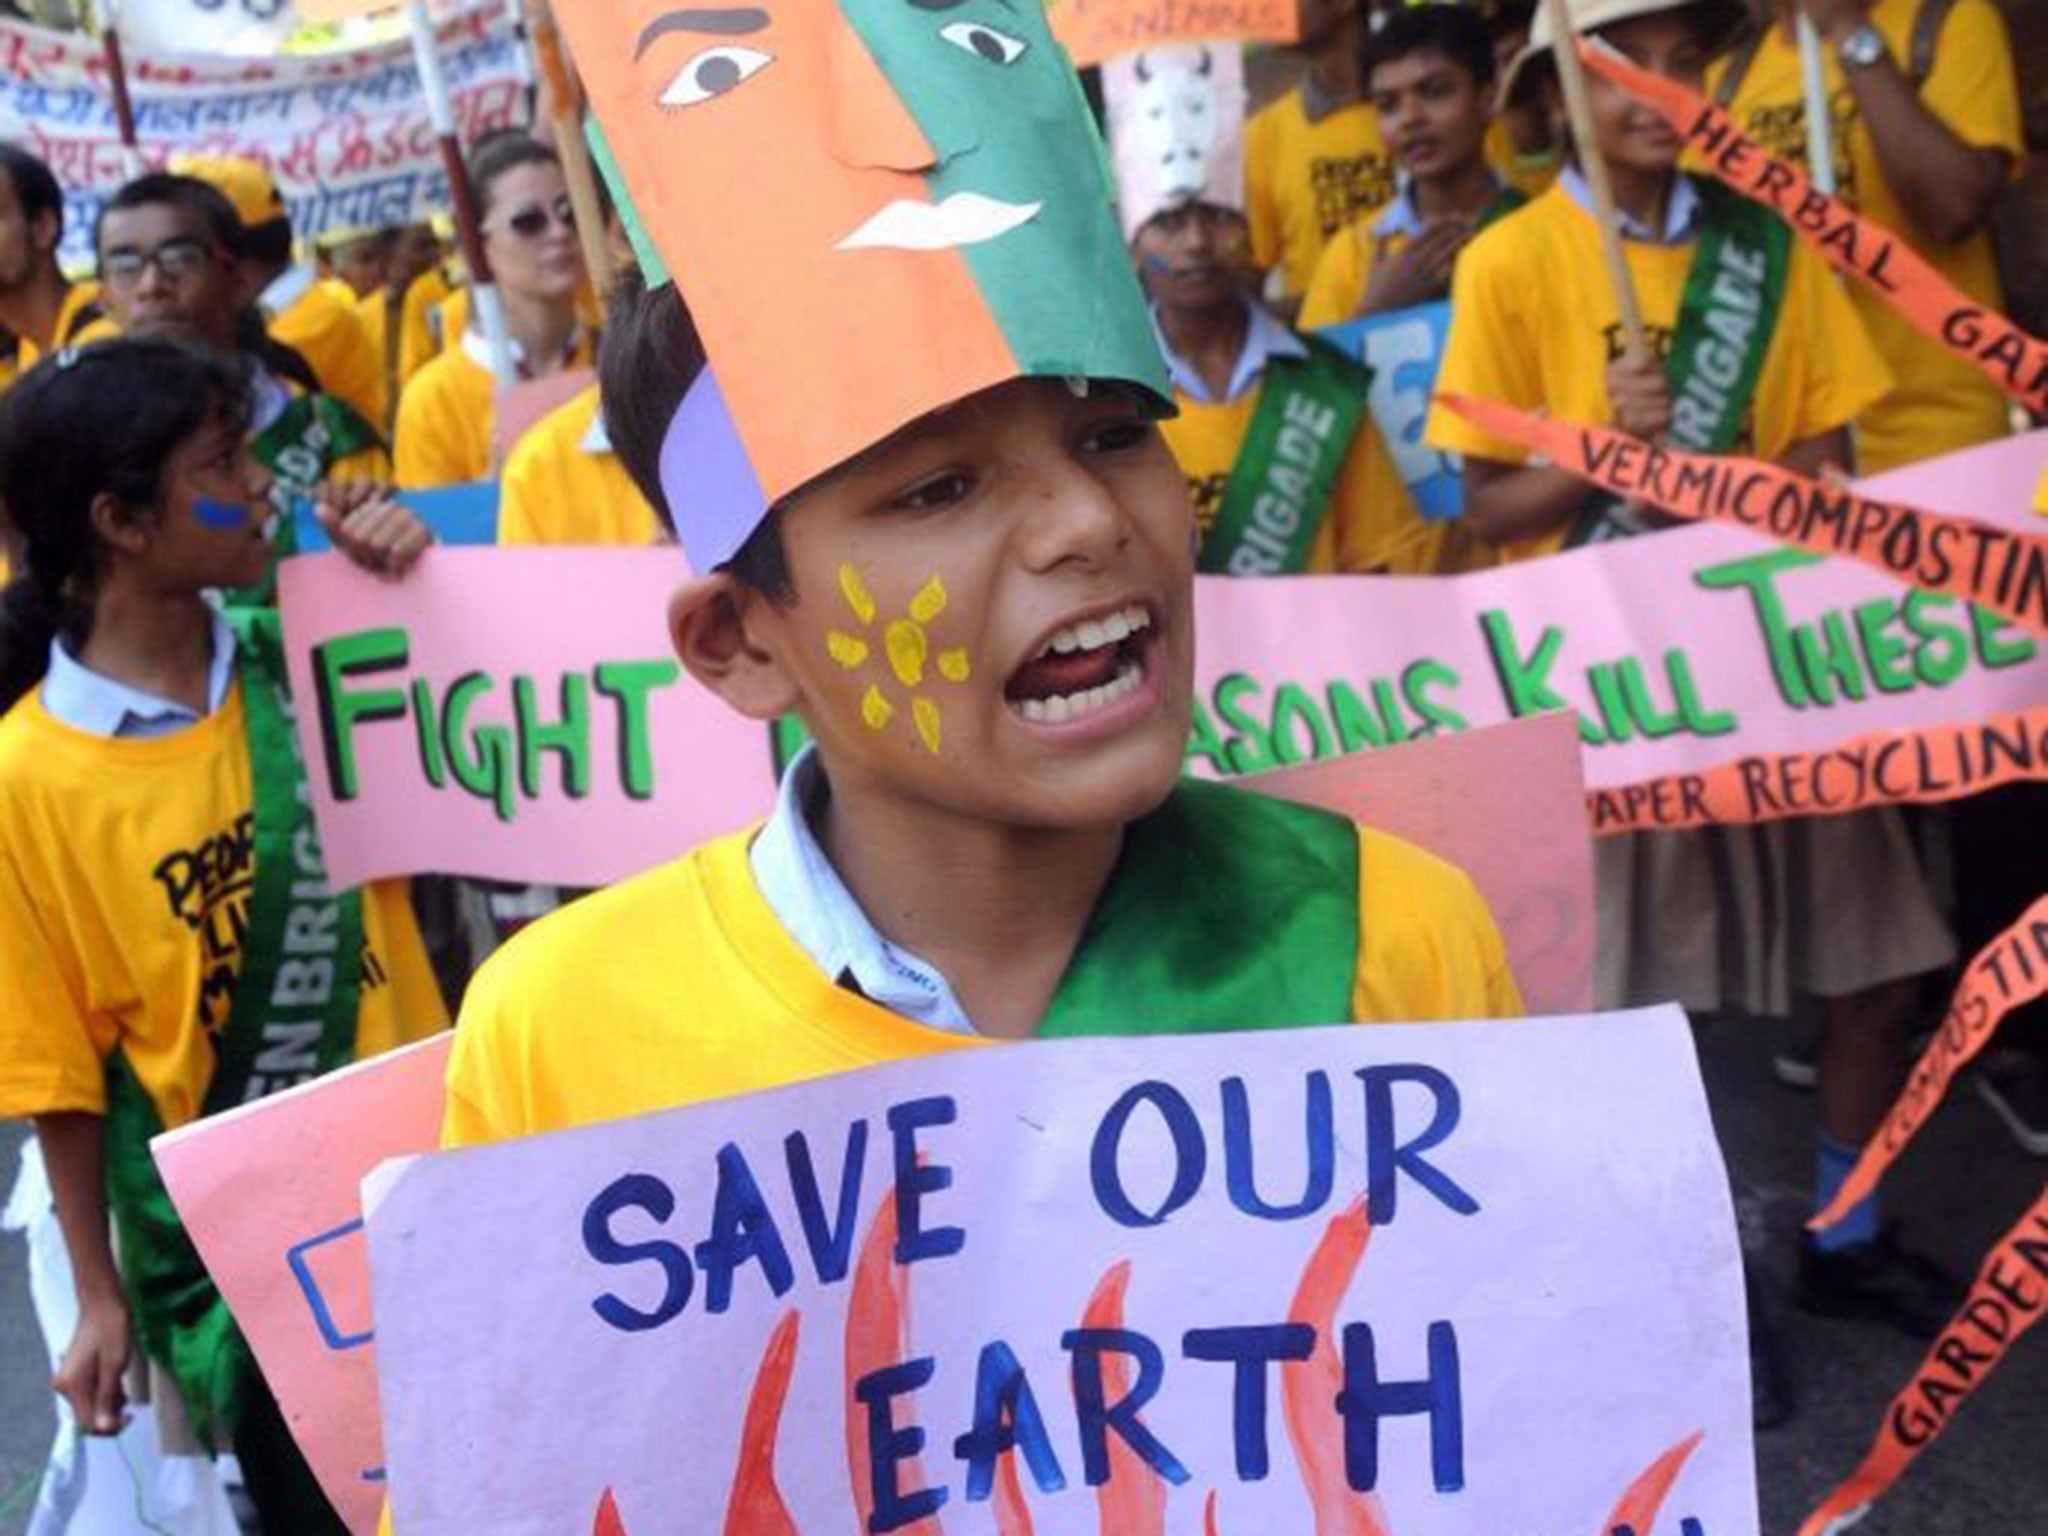 The People's Climate March in Delhi, India, yesterday